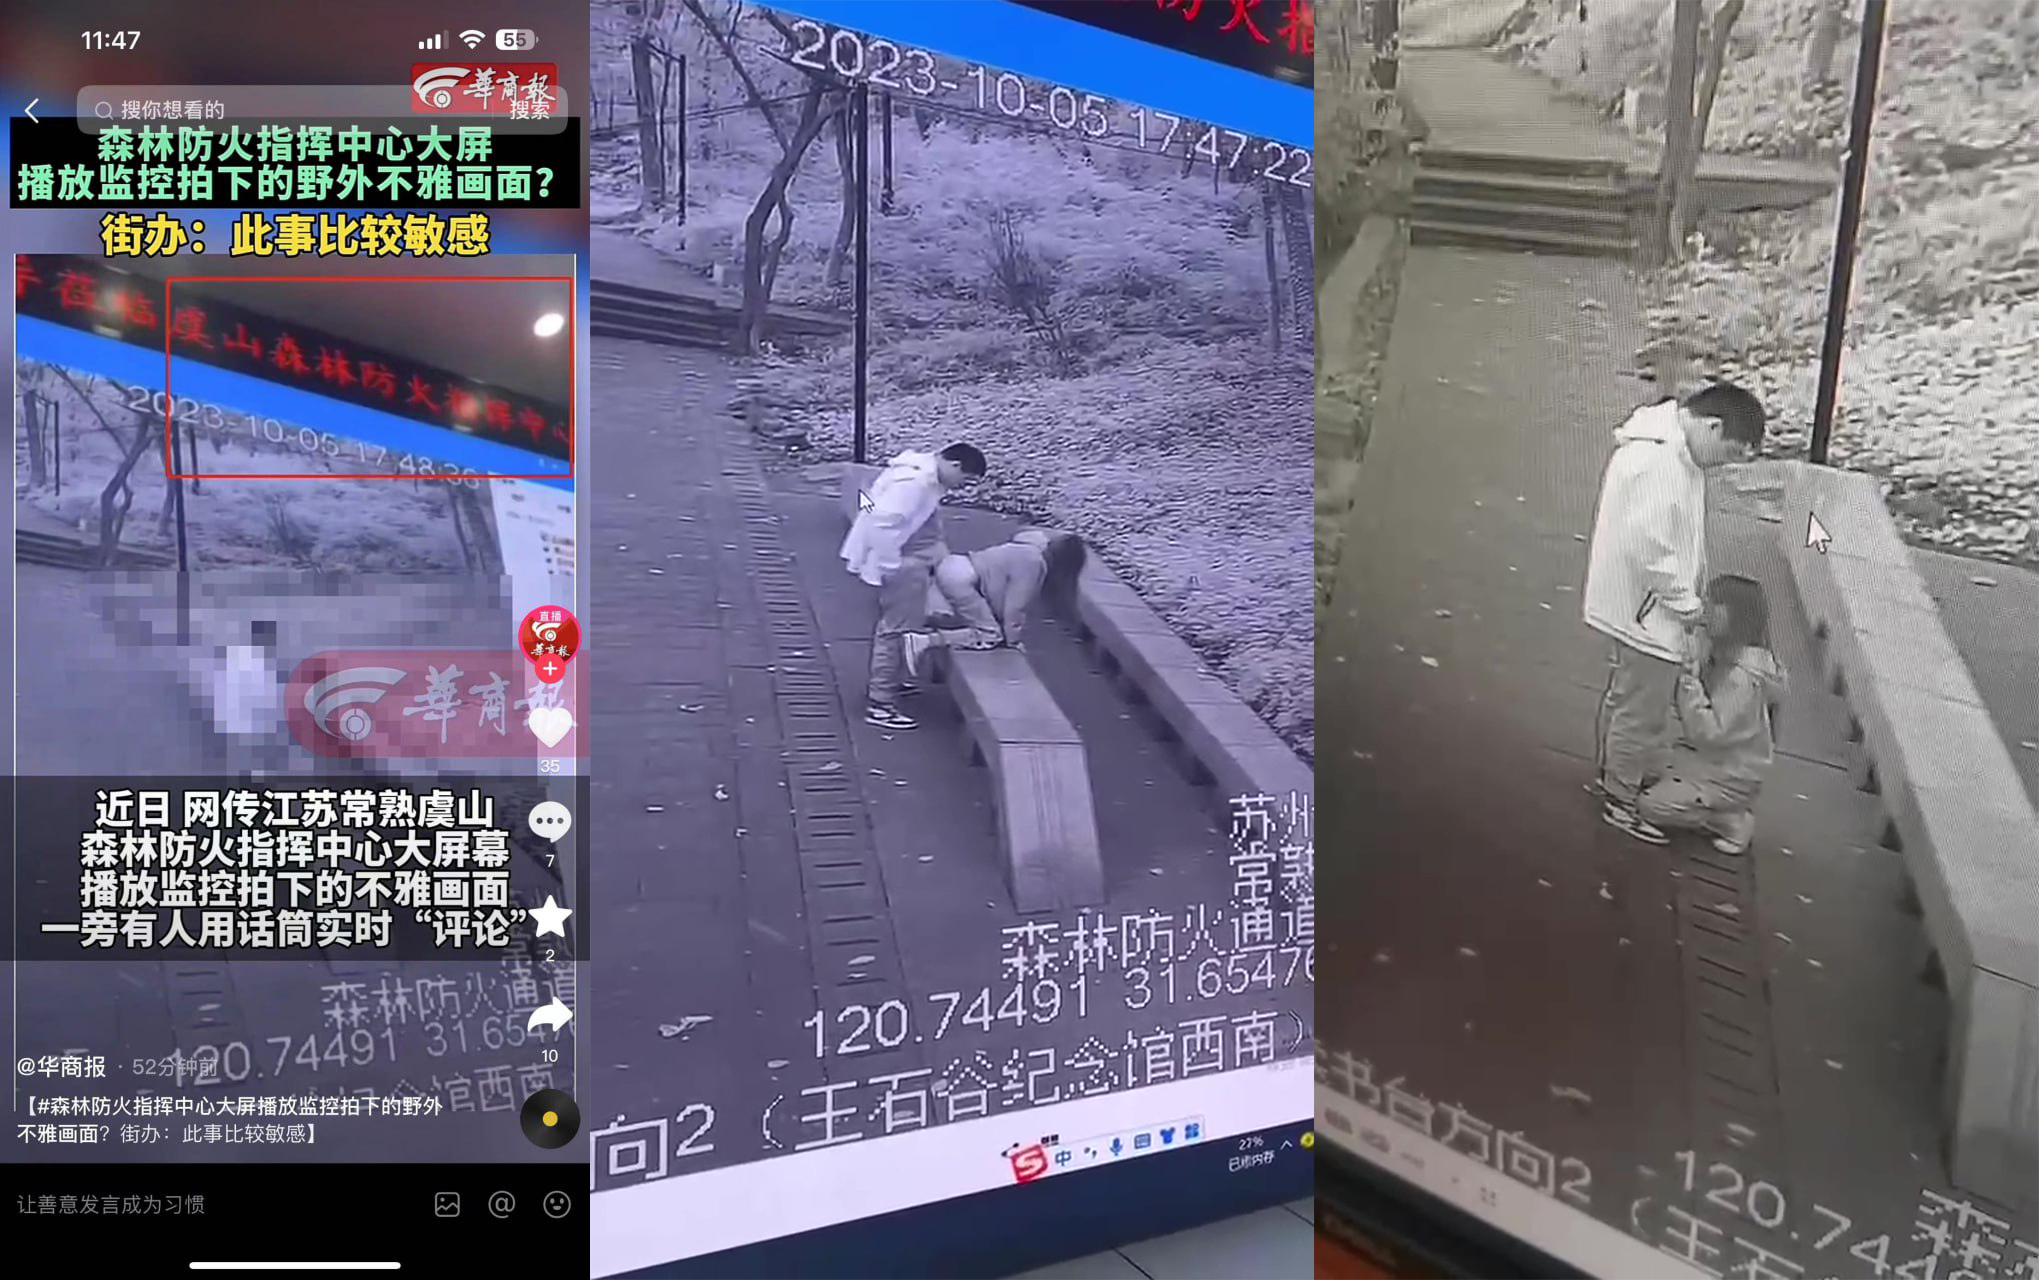 The two days of jitterbugs are very hot in Changshu Wangshigu, Suzhou, where the couple's wild fight was broadcast live on the fire center's monitor, and the fire brigade watched the whole thing.